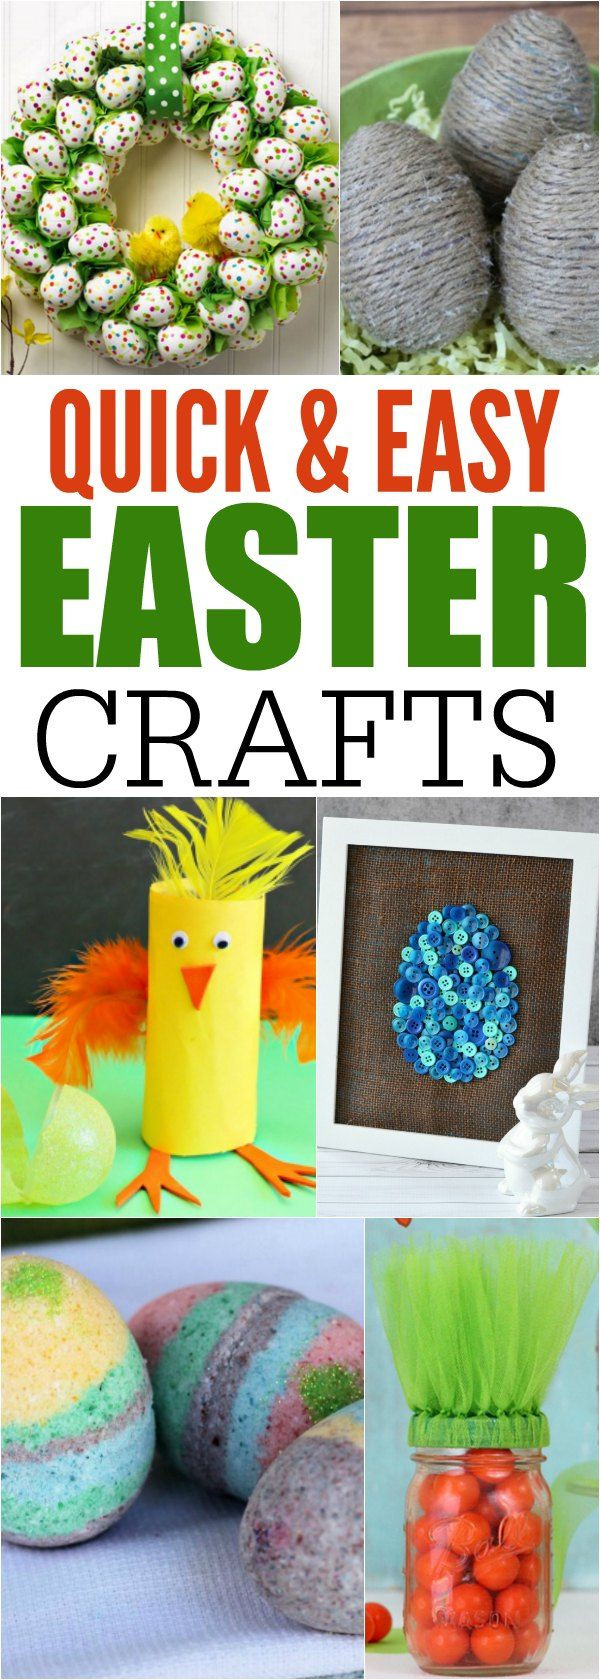 Quick Crafts For Adults
 Best 25 Easter crafts to make ideas on Pinterest